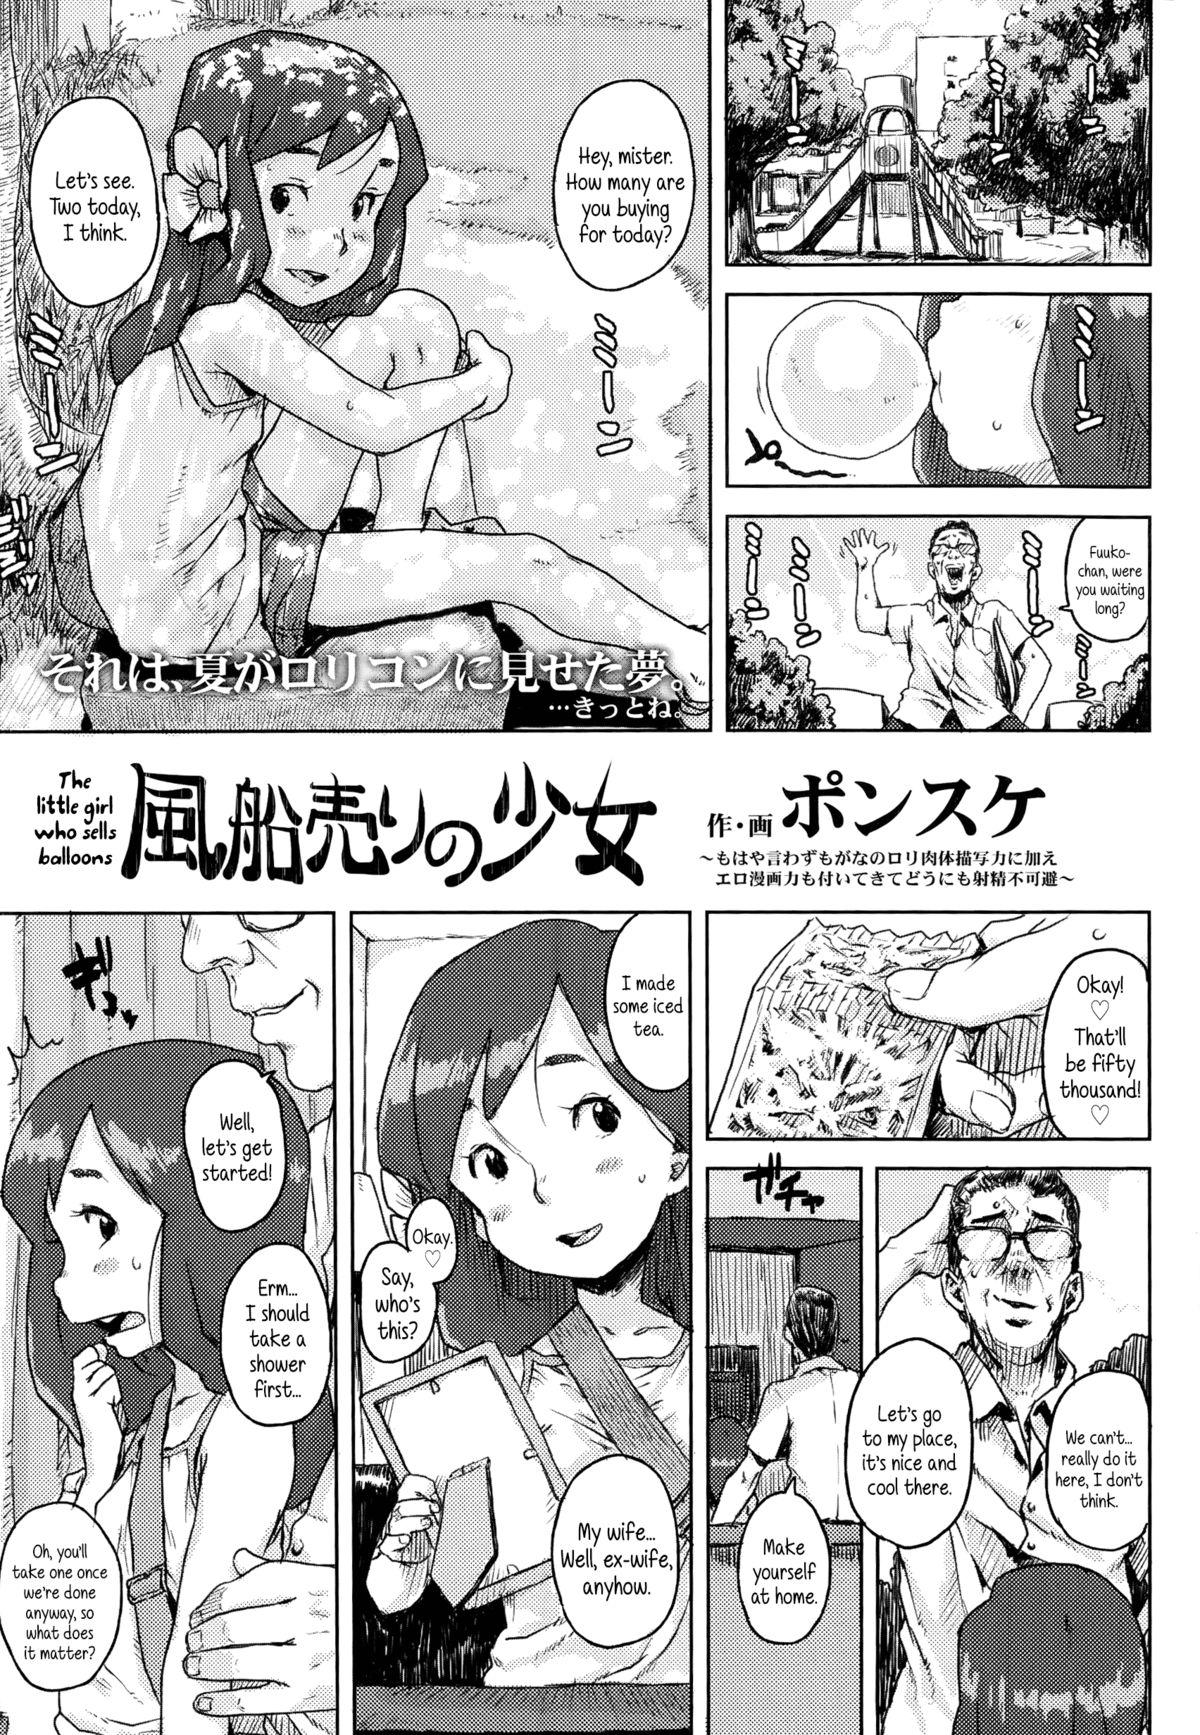 Dominate Fuusen Uri no Shoujo | The Girl Who Sells Balloons Doublepenetration - Page 1